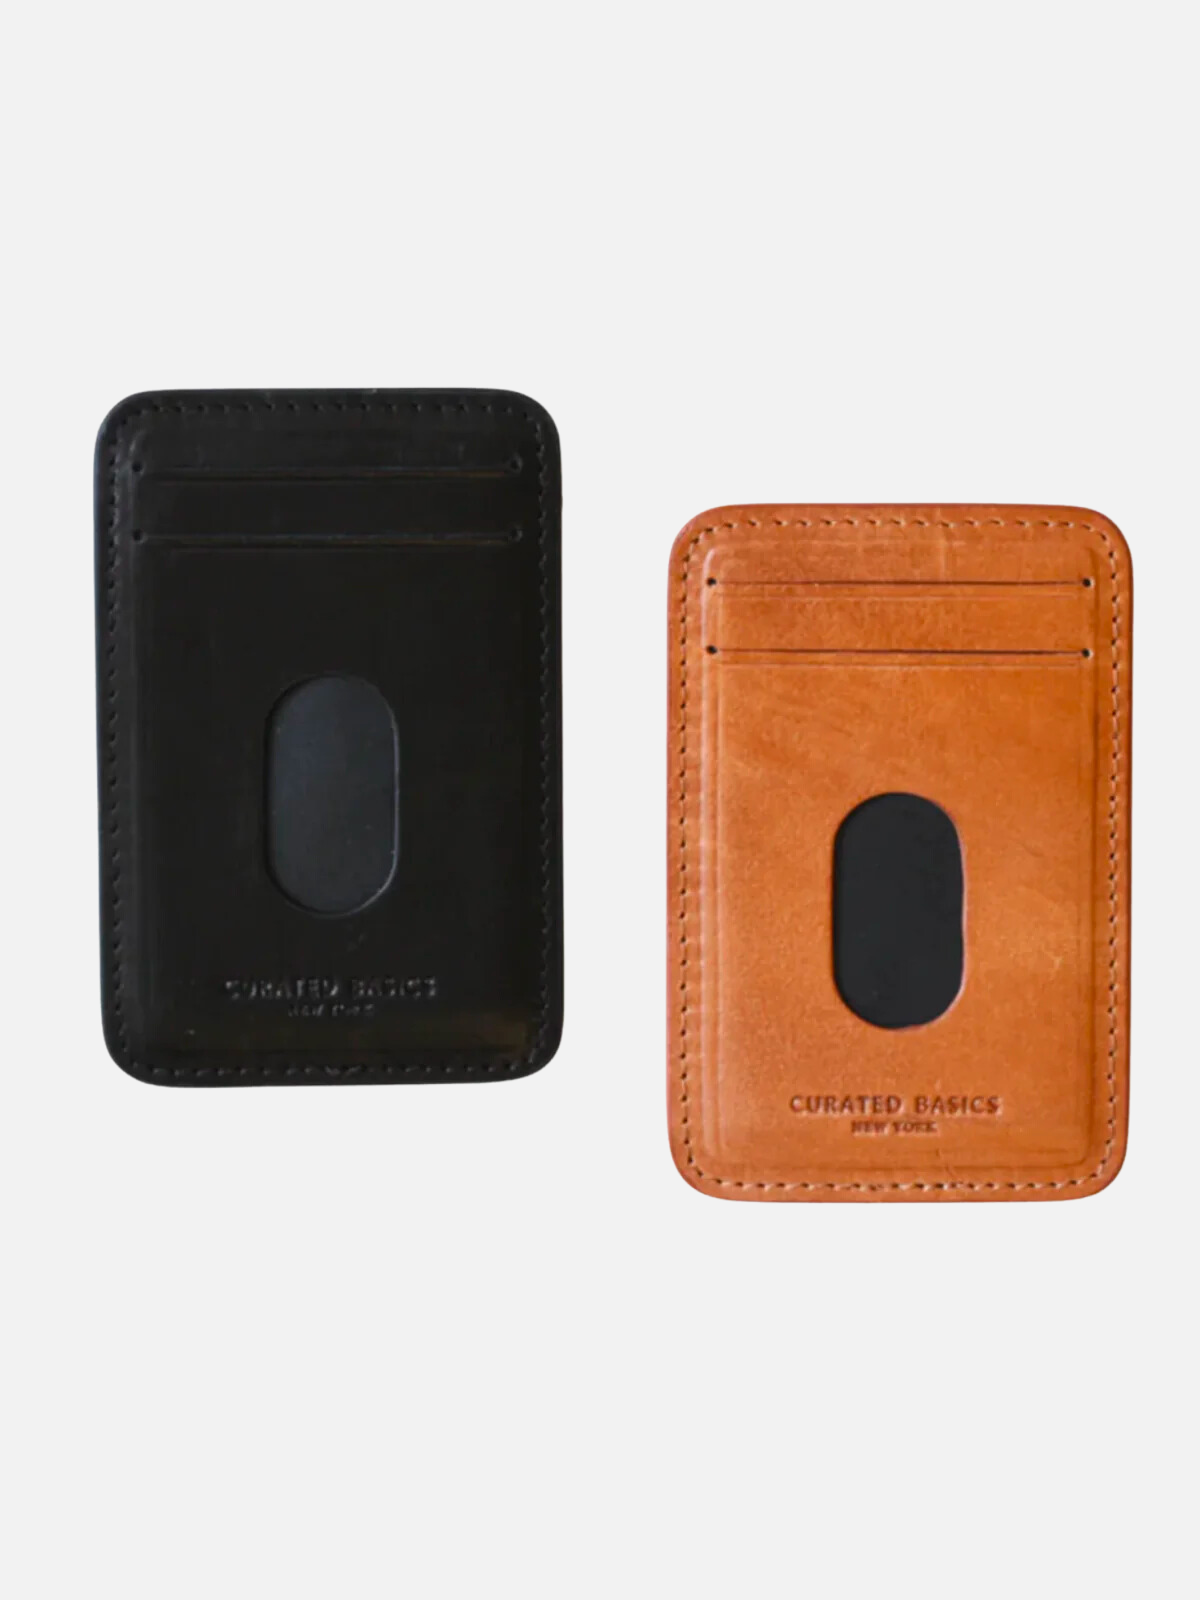 curated basics magsafe leather cardholder iphone wallet brown tan black kempt athens ga georgia men's clothing store